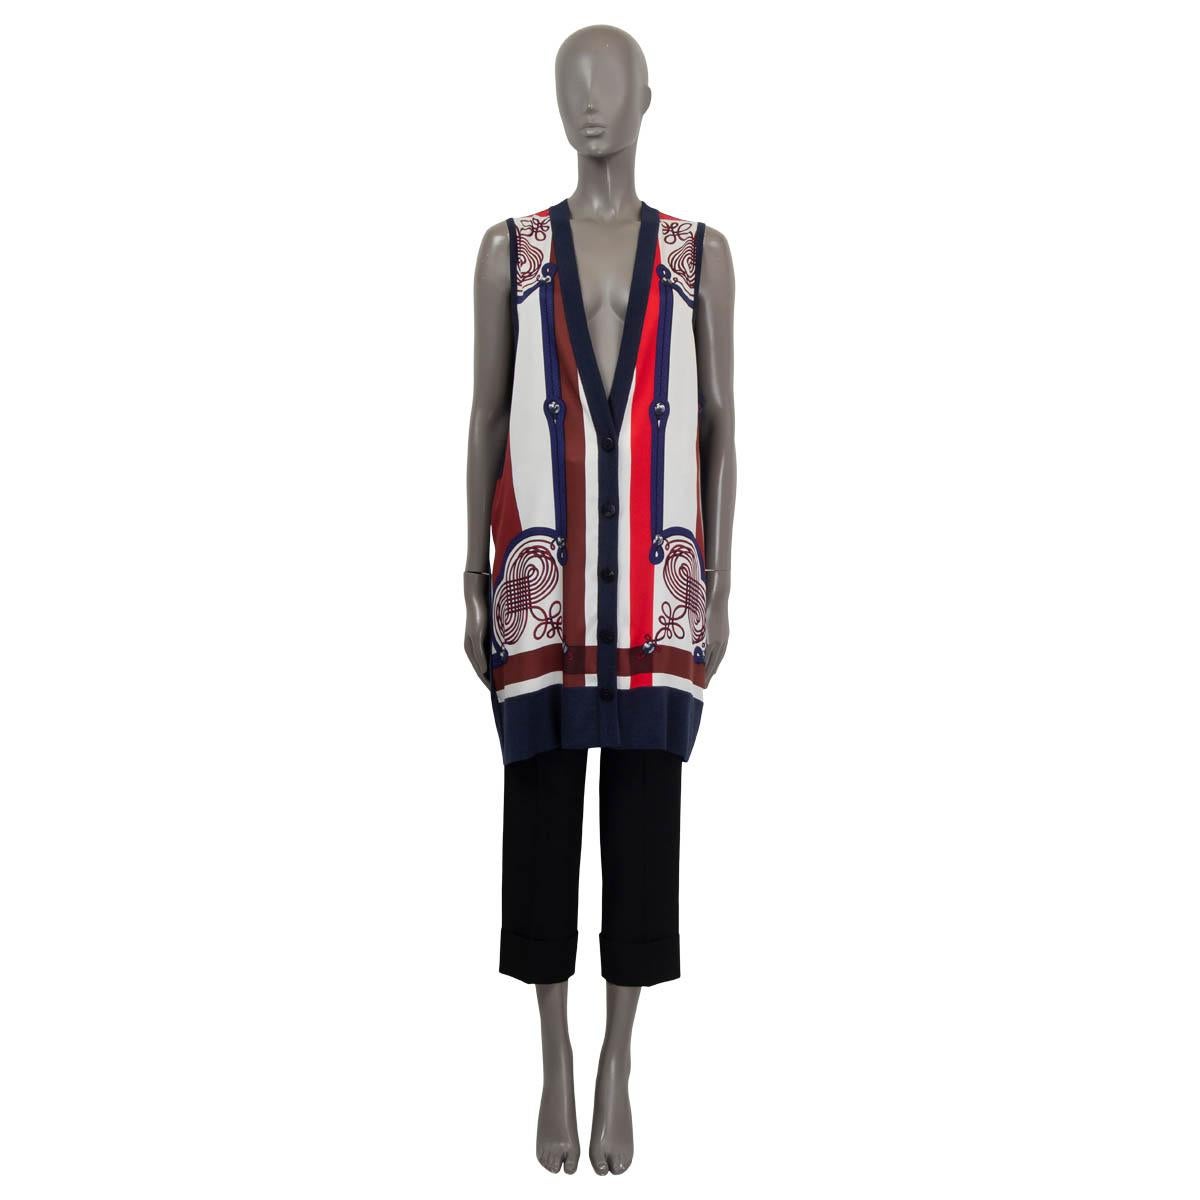 100% authentic Hermès Resort 2019 Brandebourgs Encoder oversized long vest in off-white, red, brown and blue silk (100%) with knit parts in navy cashmere (50%) and silk (50%). Opens with navy Hermès buttons on the front. Unlined. Has been worn once